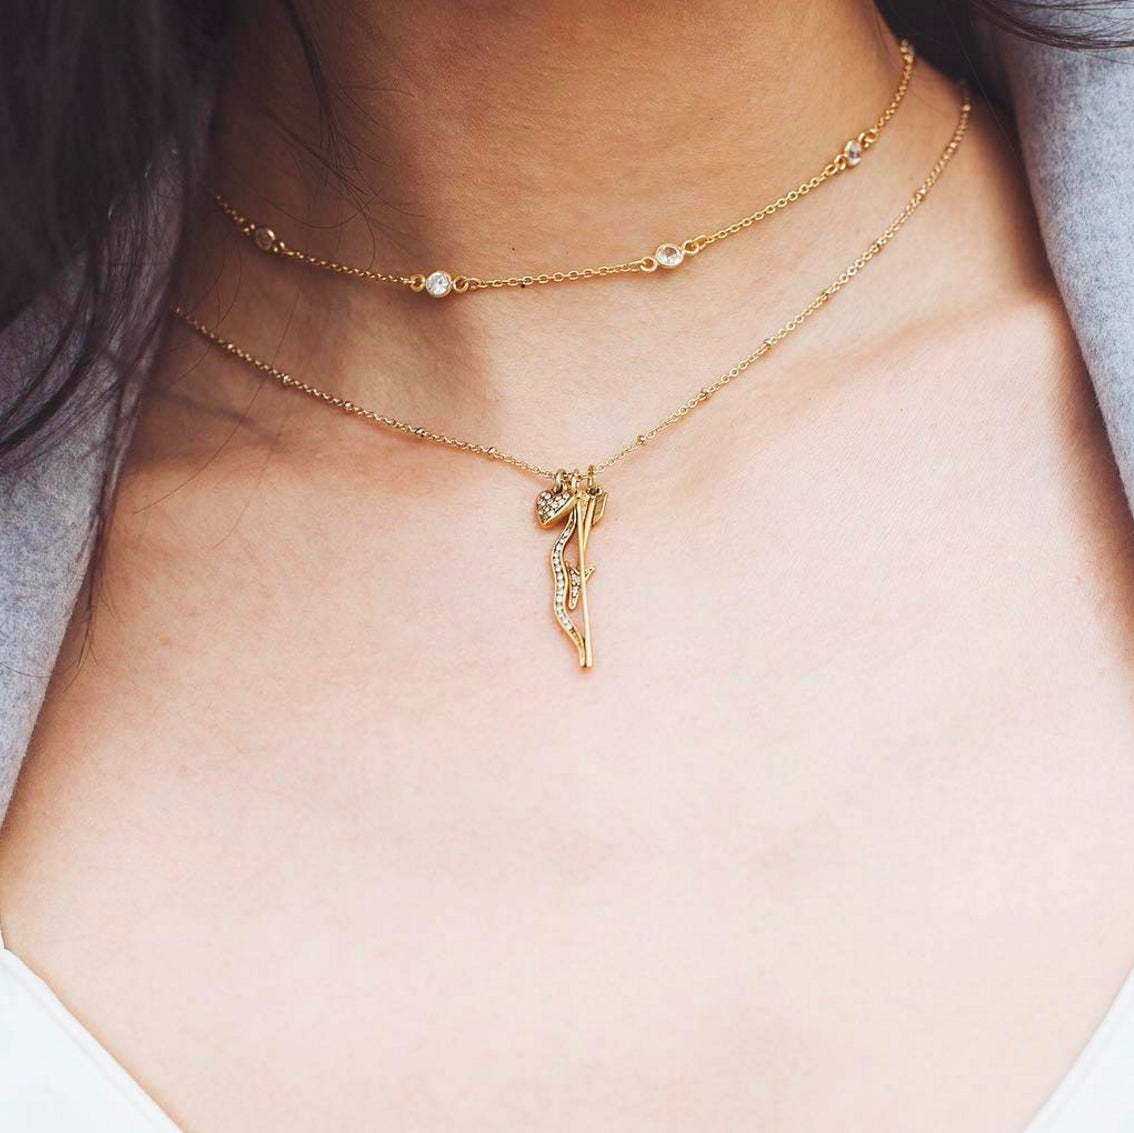 Thoughtful Misfit in Sequin's Love is a Battlefield Talisman Necklace